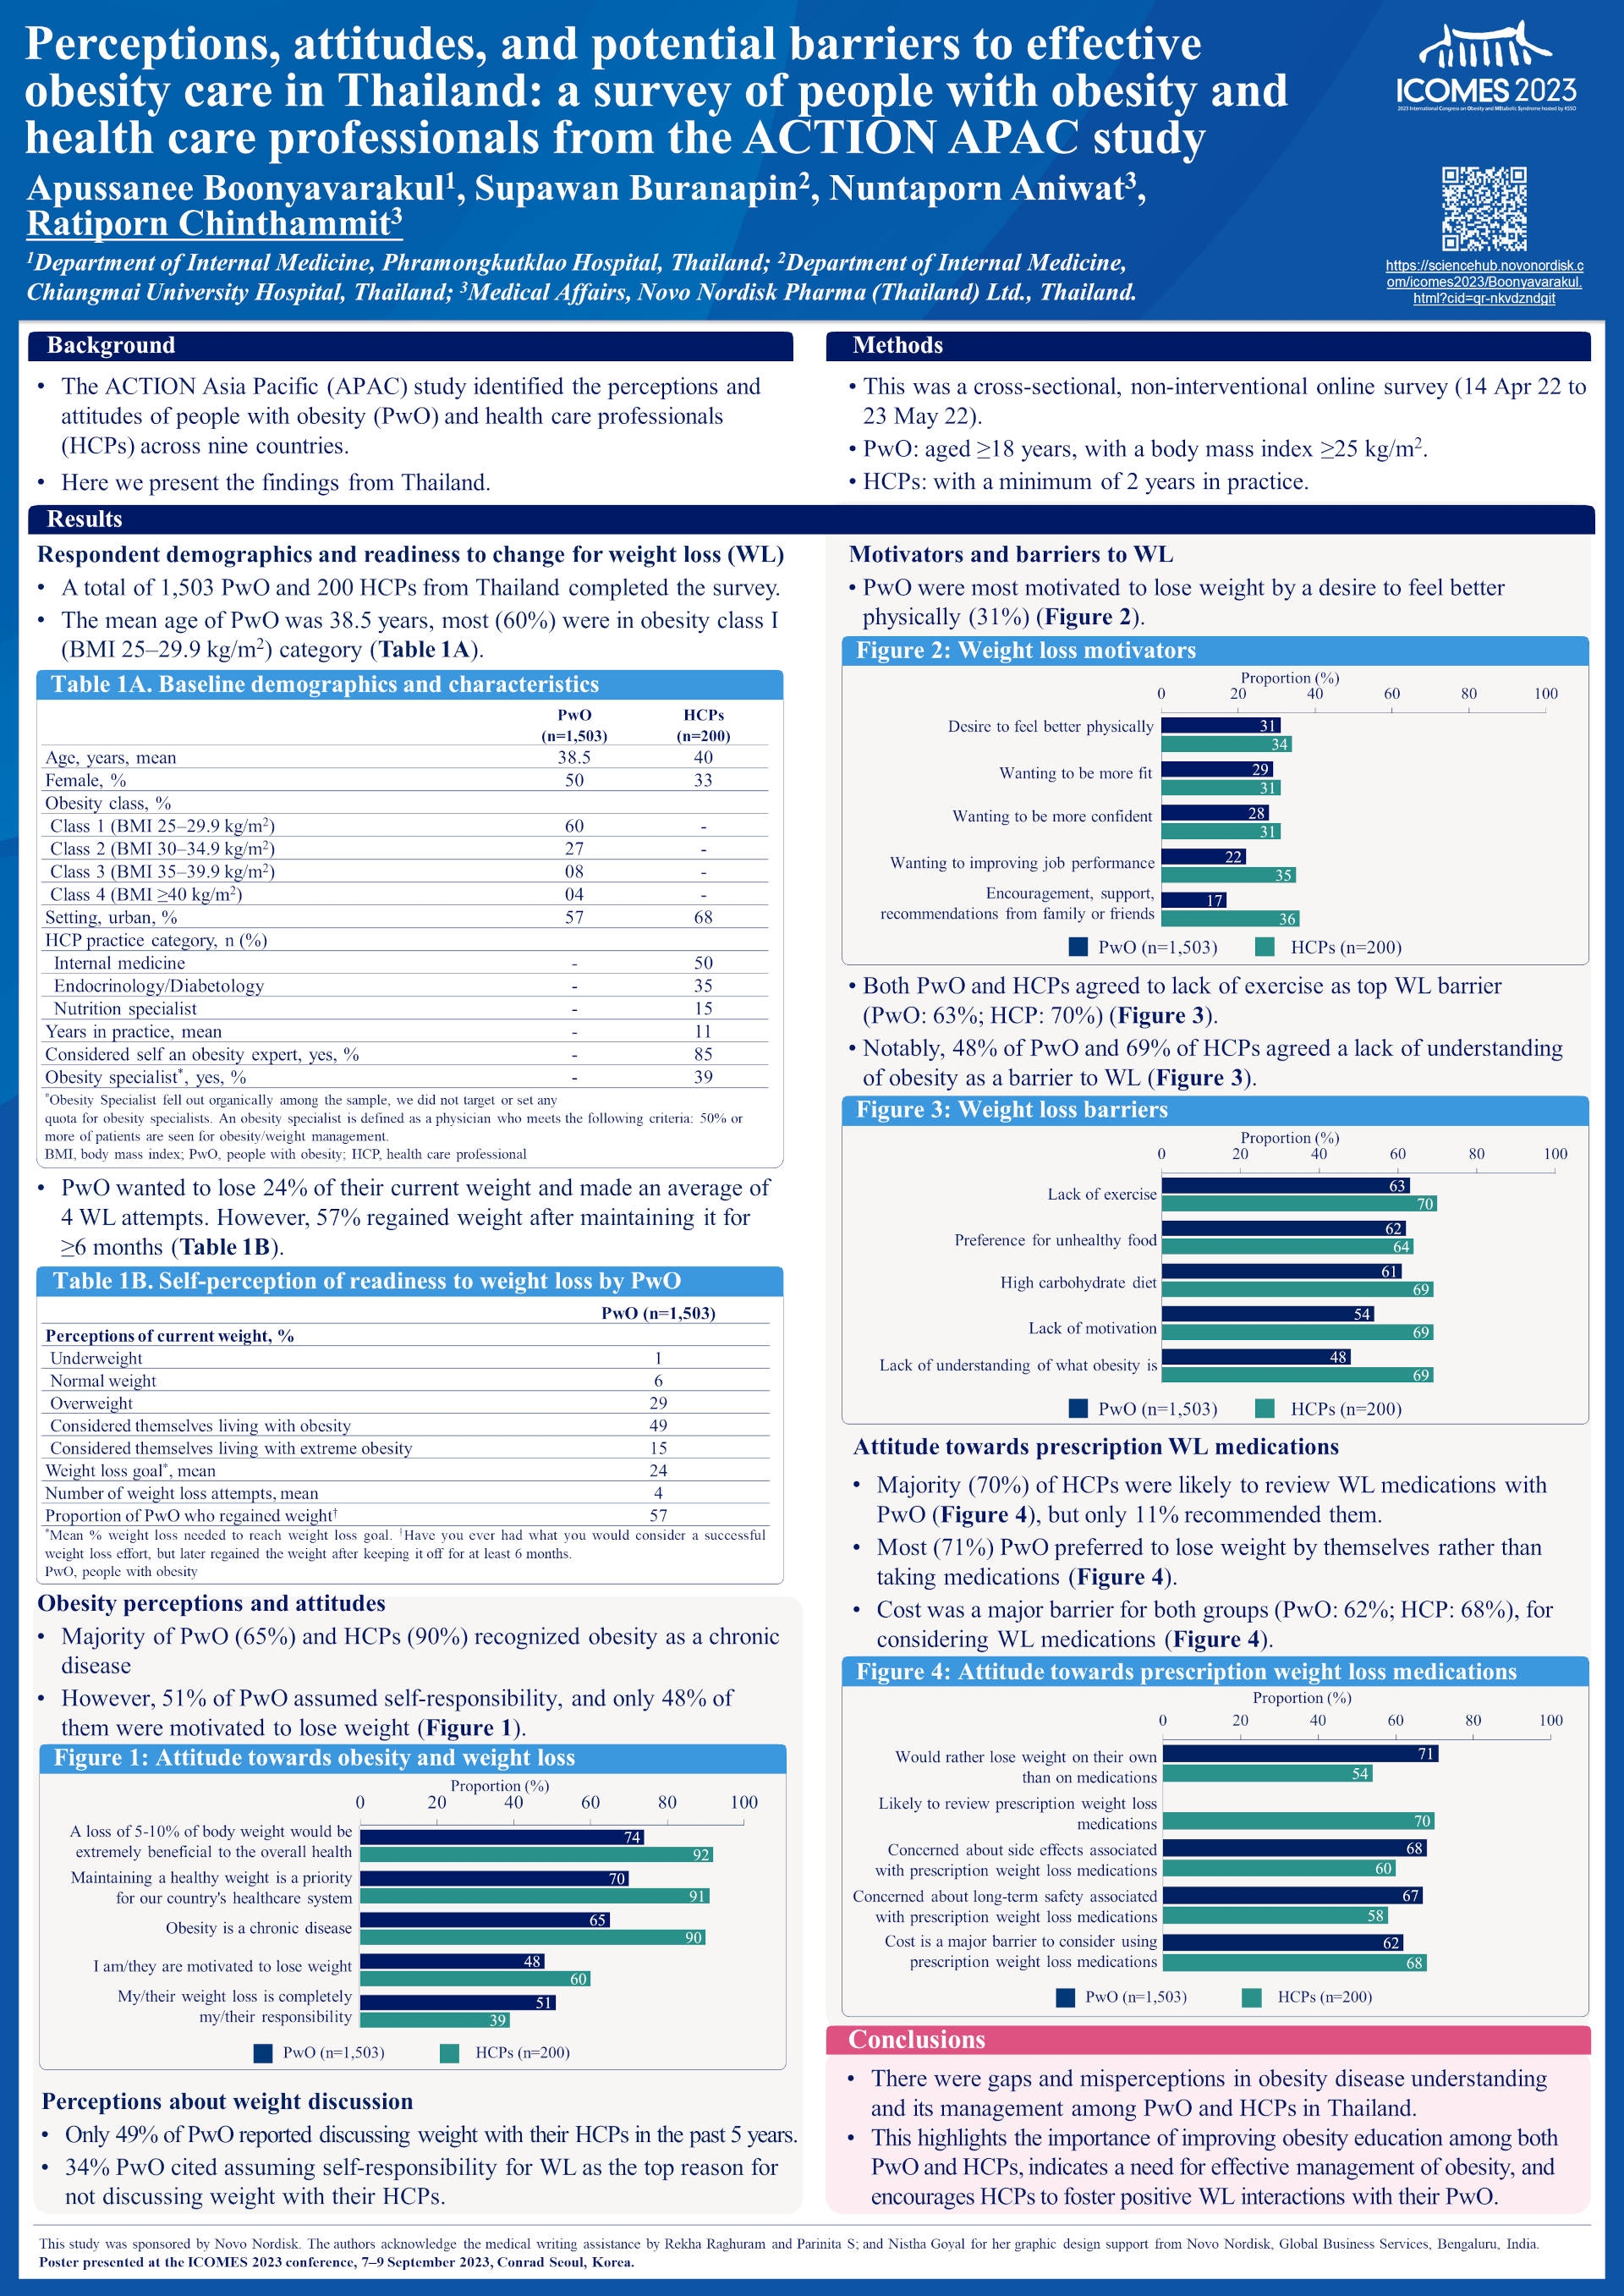 Perceptions, attitudes, and potential barriers to effective obesity care in Thailand: a survey of people with obesity and health care professionals from the ACTION APAC study - poster